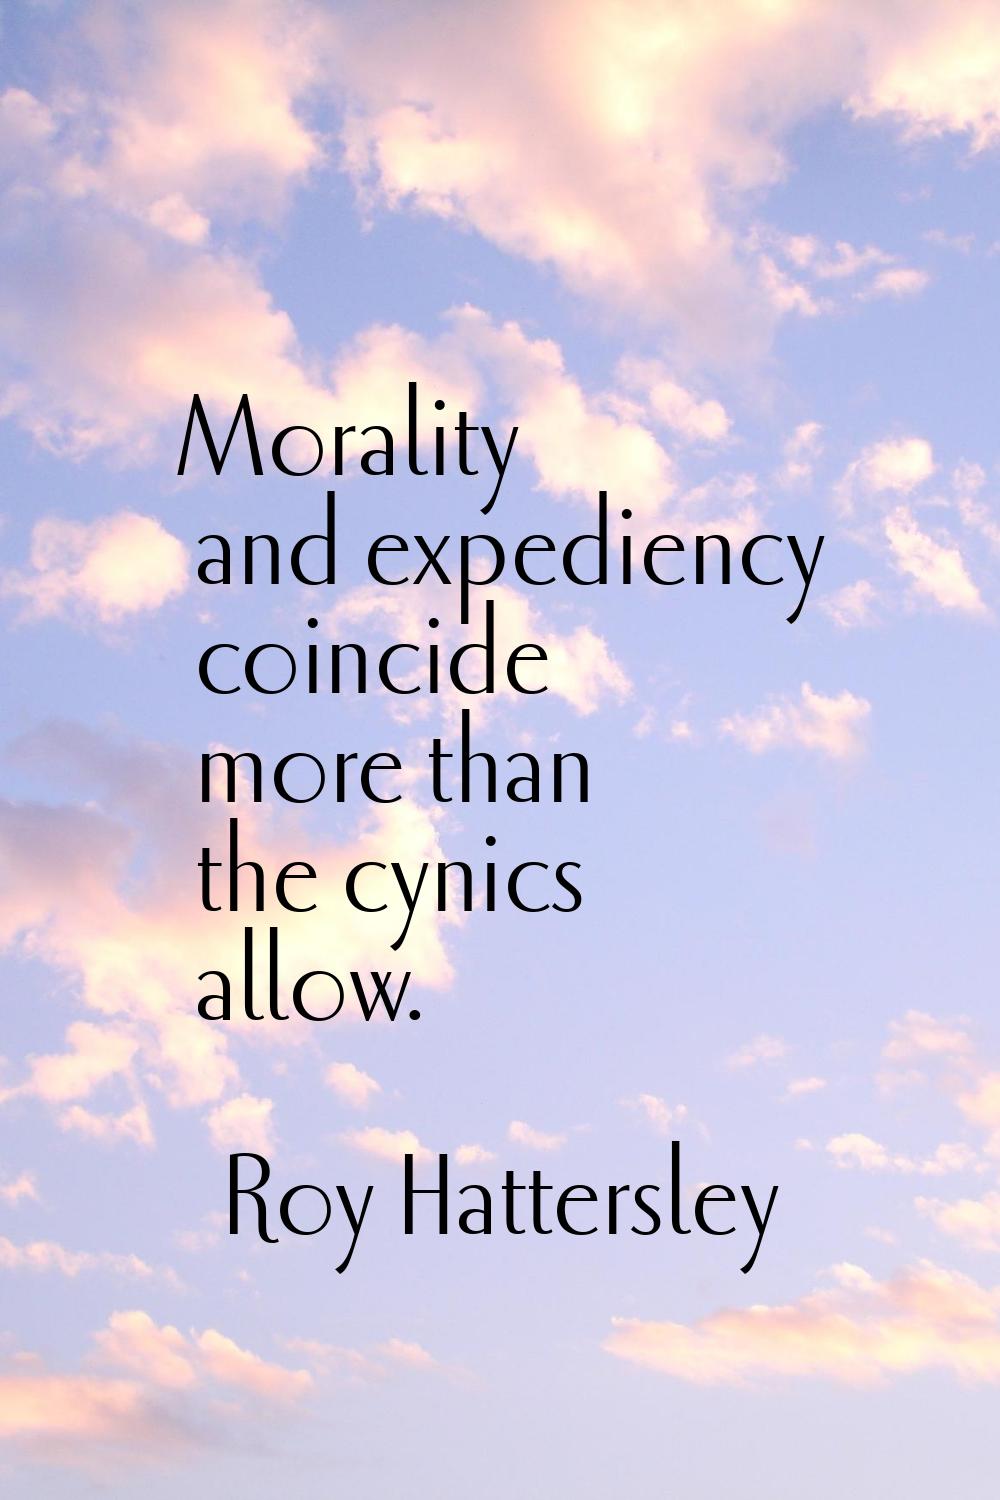 Morality and expediency coincide more than the cynics allow.